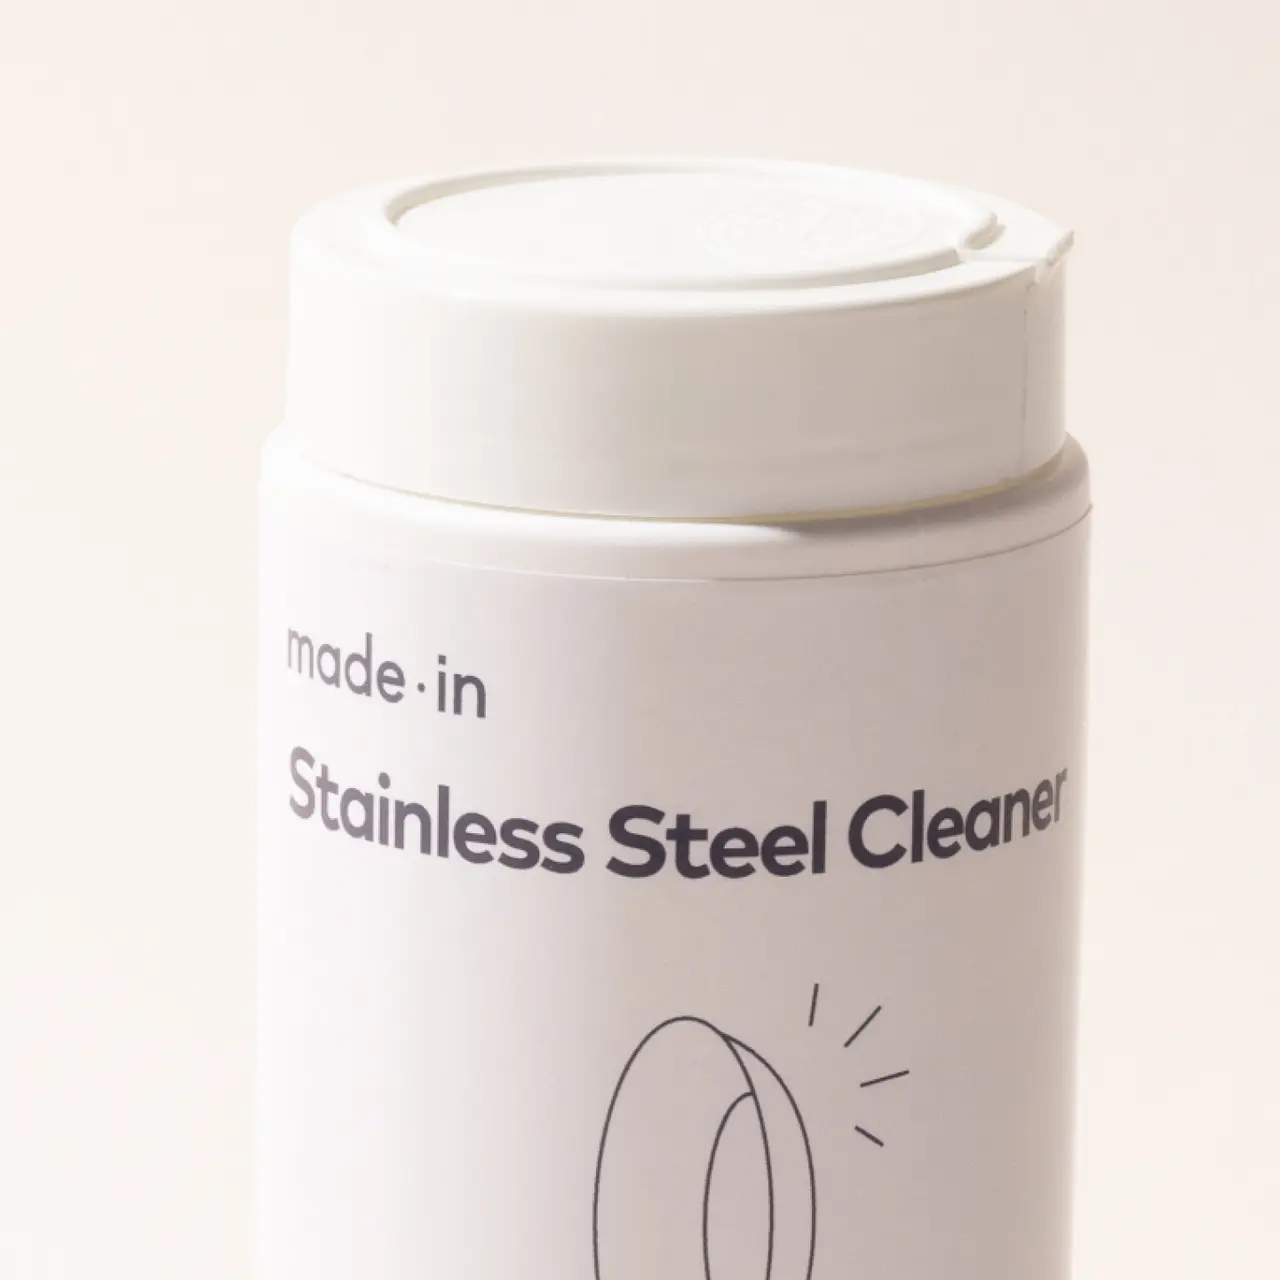 Save Money 30% off Multi-Purpose Cleaning Paste Steel Cleaner Home